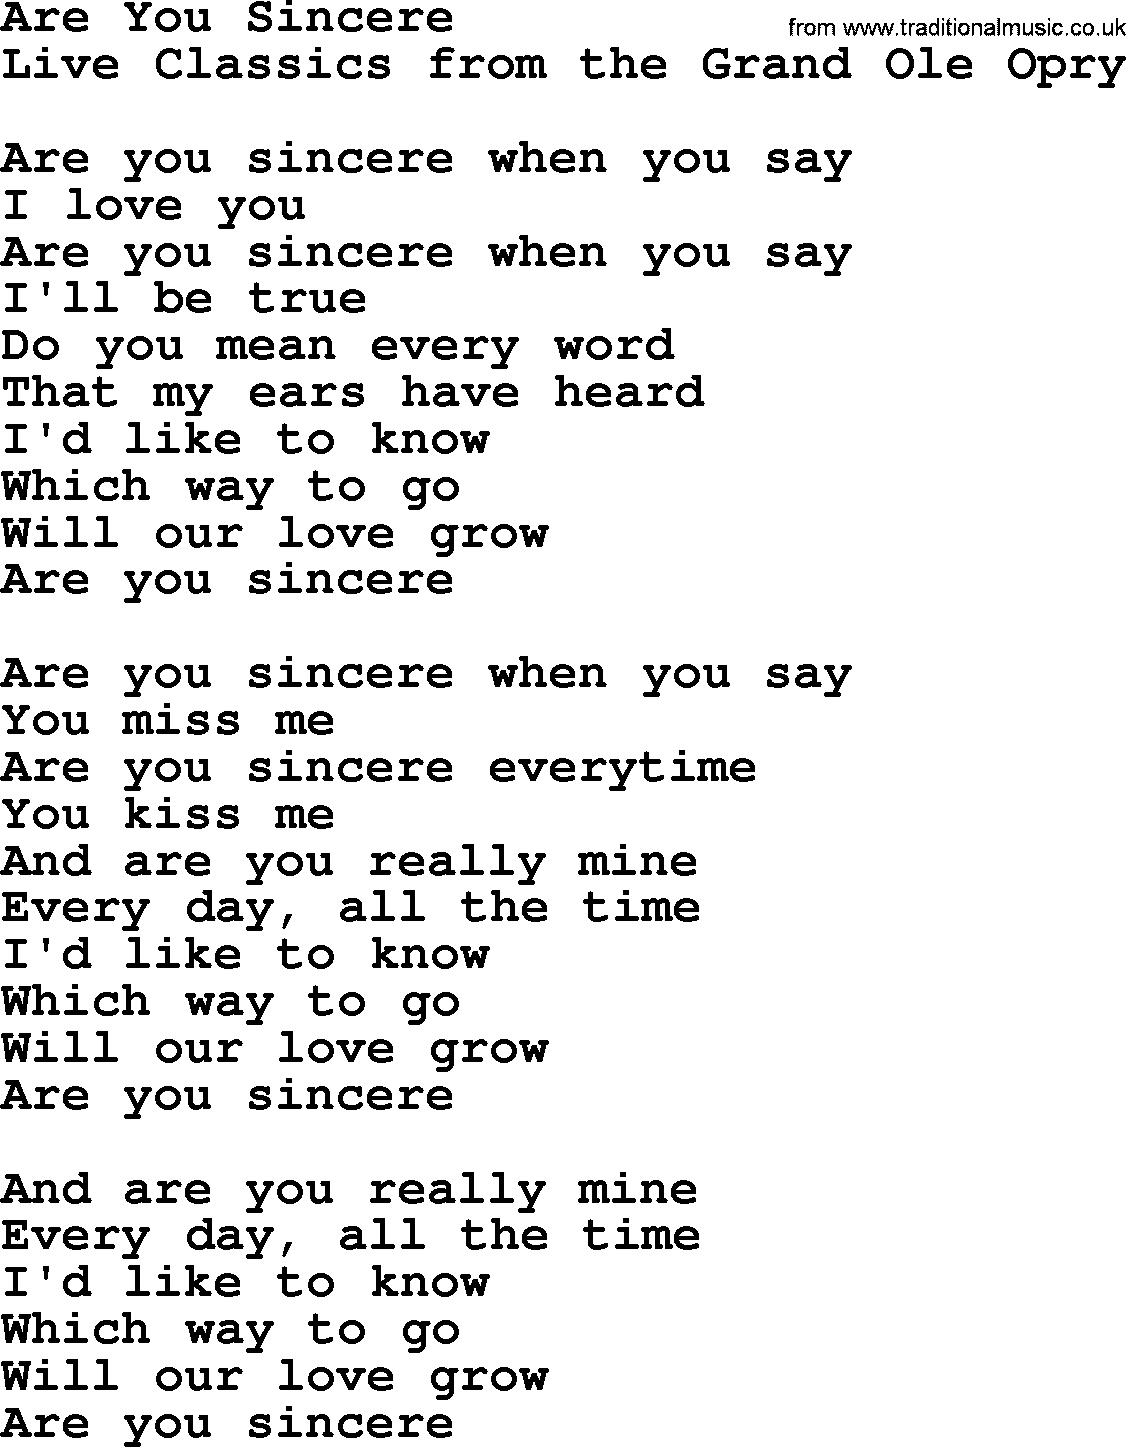 Marty Robbins song: Are You Sincere, lyrics